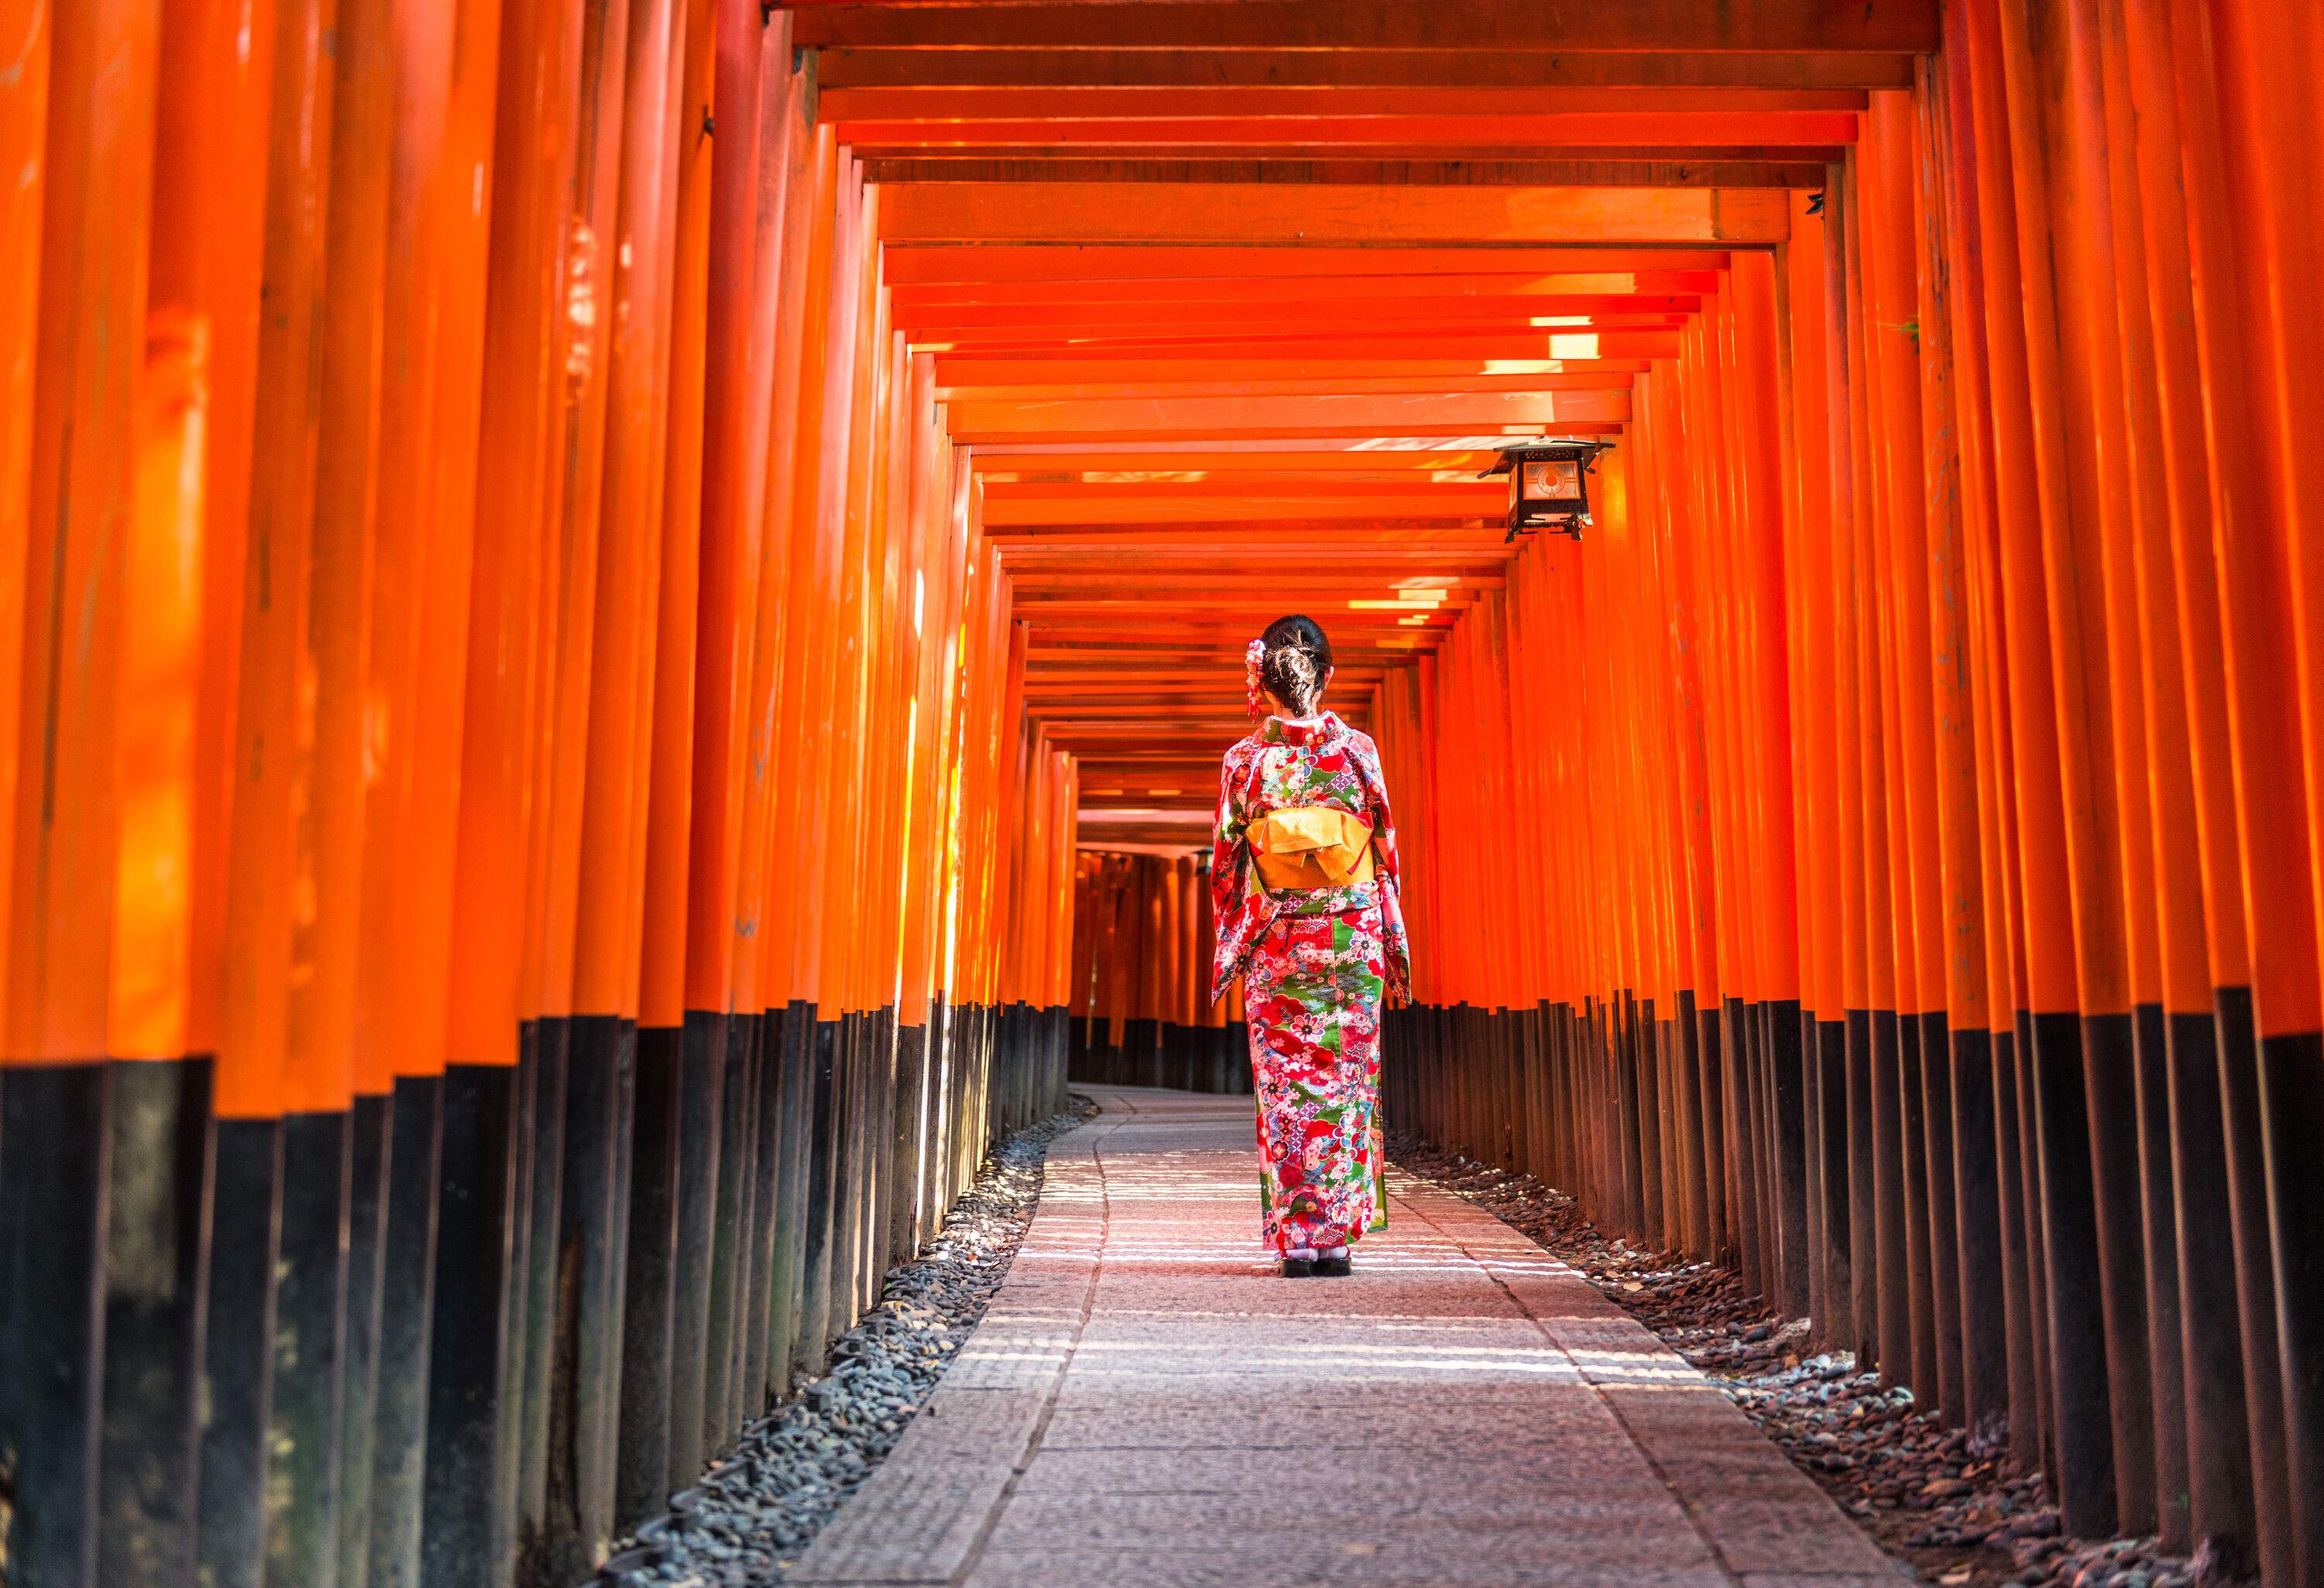 A woman in a traditional and colourful kimono on a pathway lined with orange pillars with Japanese inscriptions.